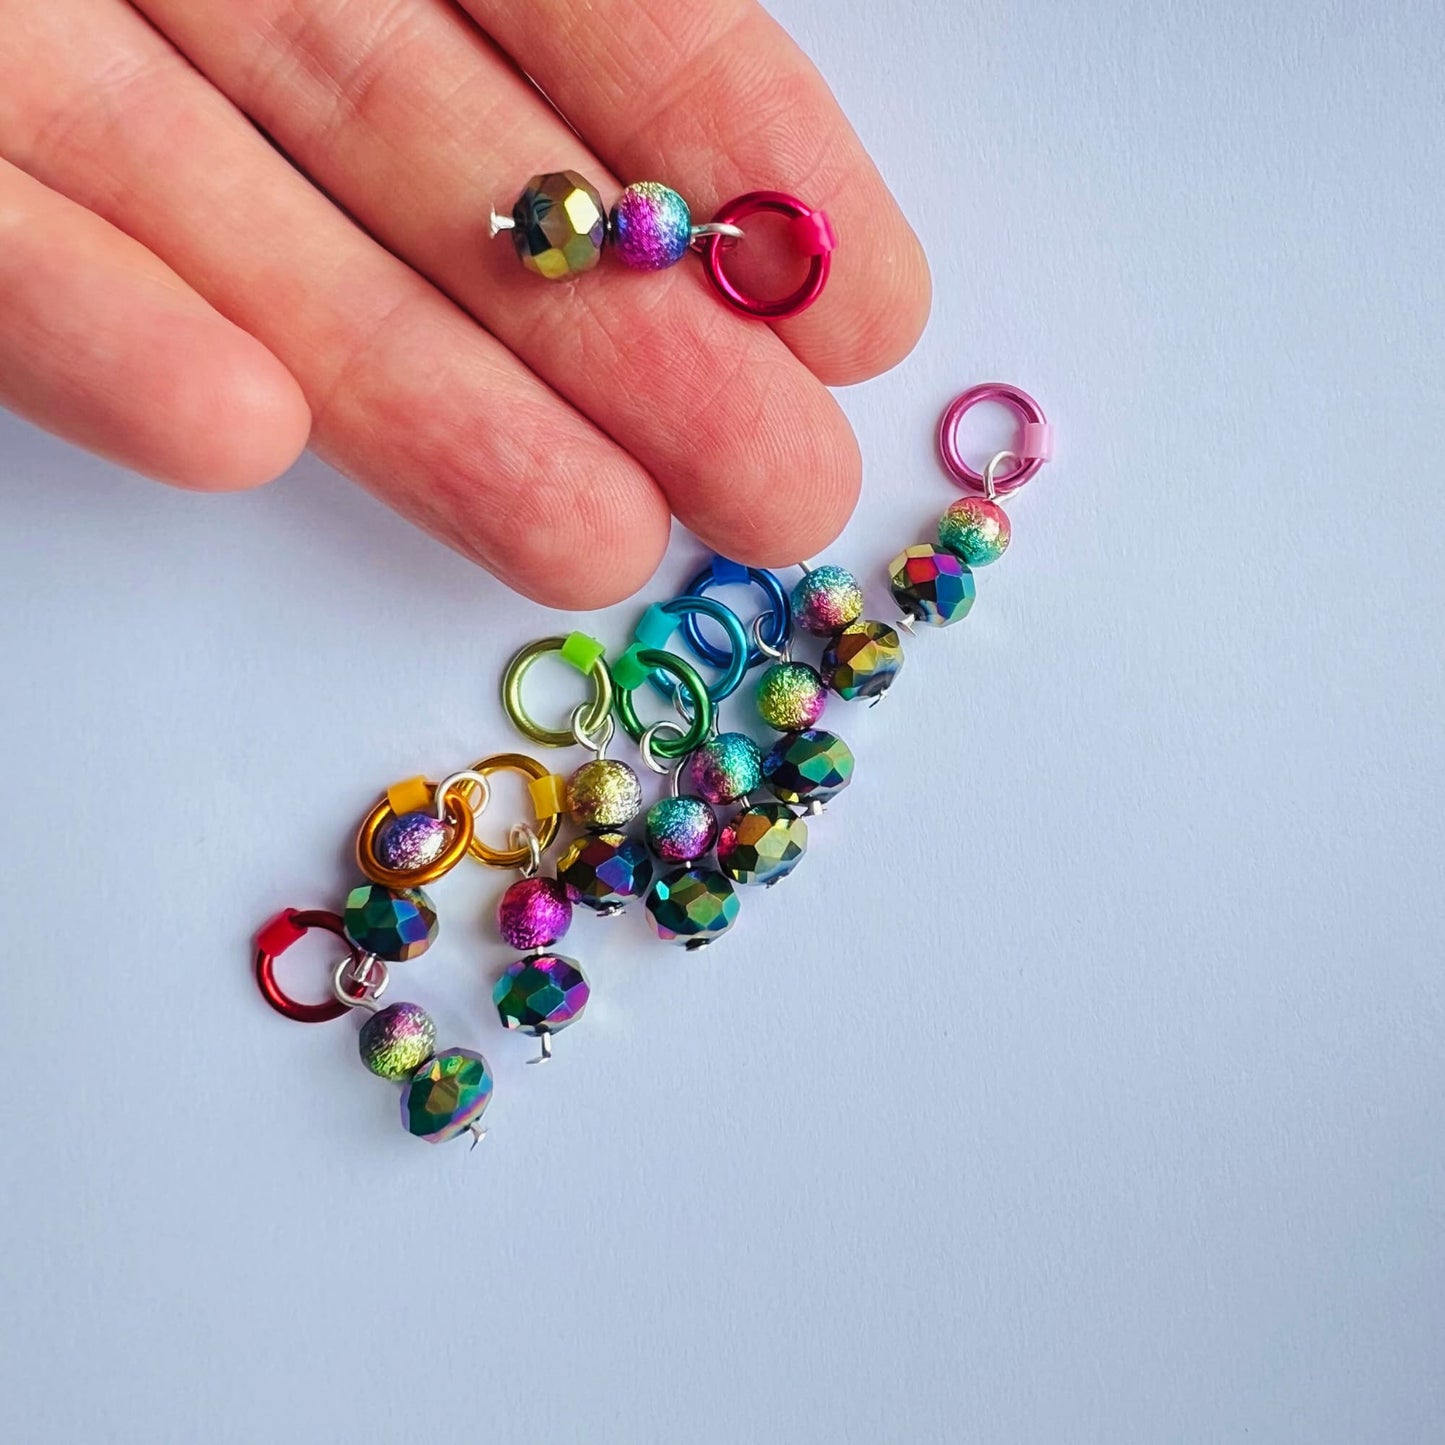 Rainbow Stitch Markers for Knitting  - Festival of Colour